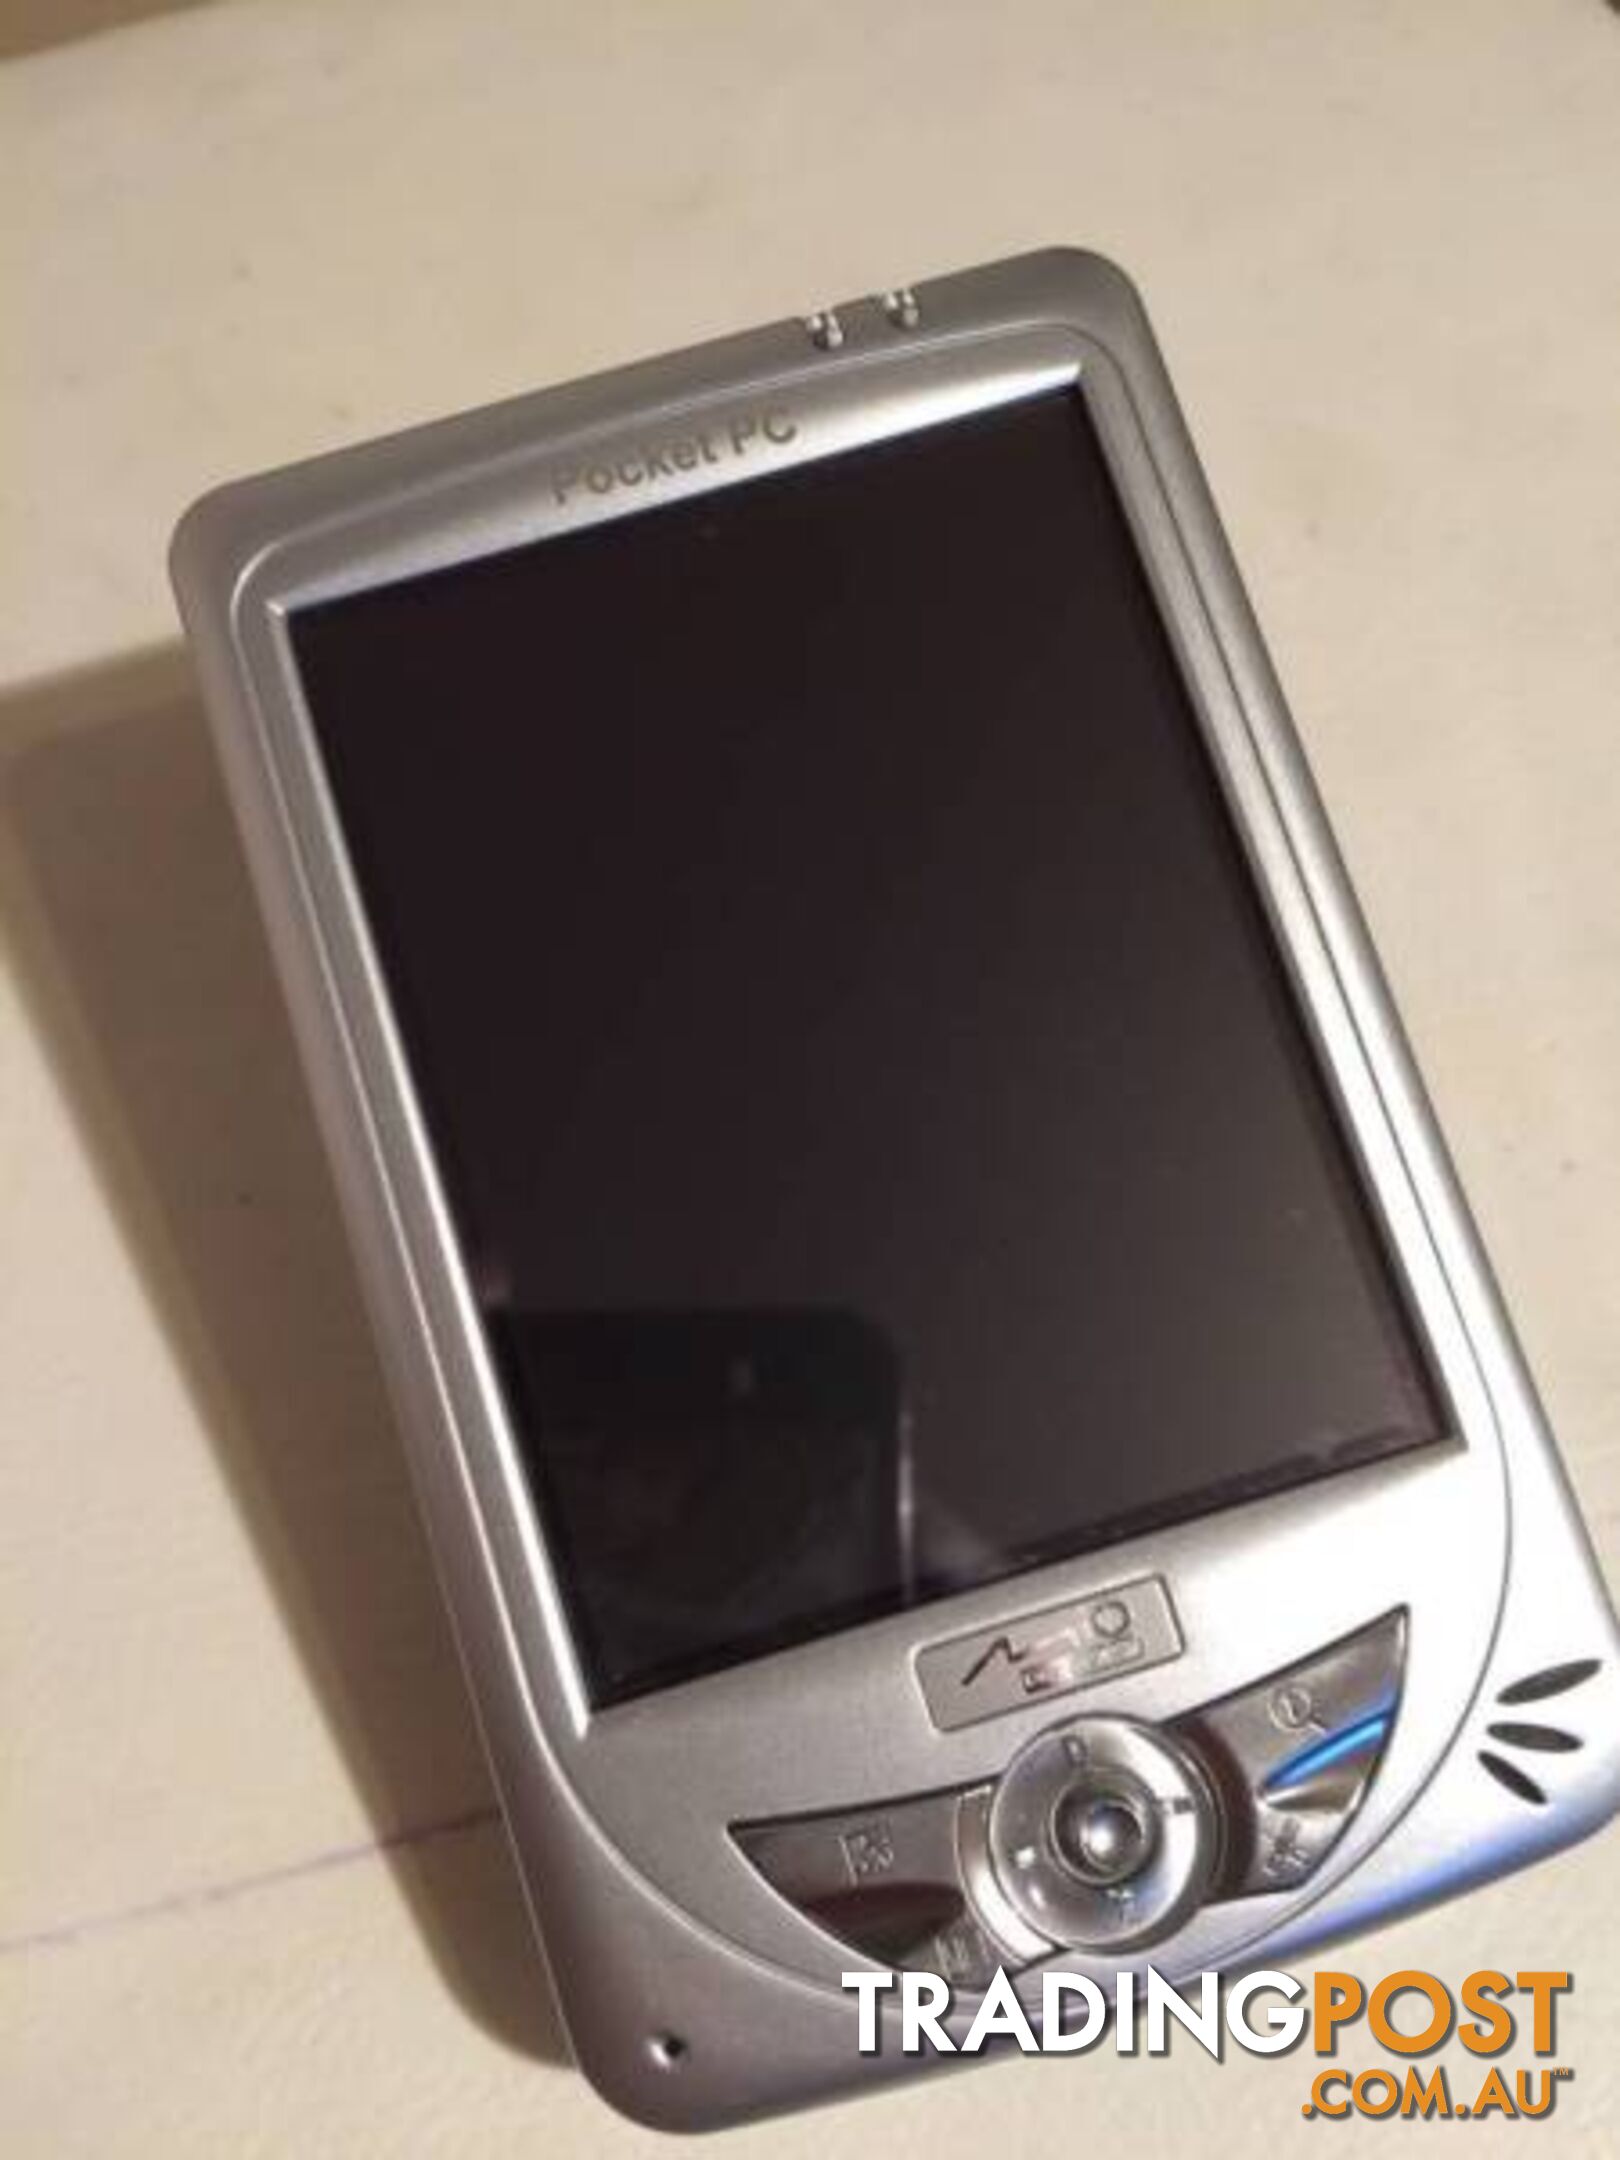 POCKET PC IN WORKING CONDITION ( NO CHARGER )